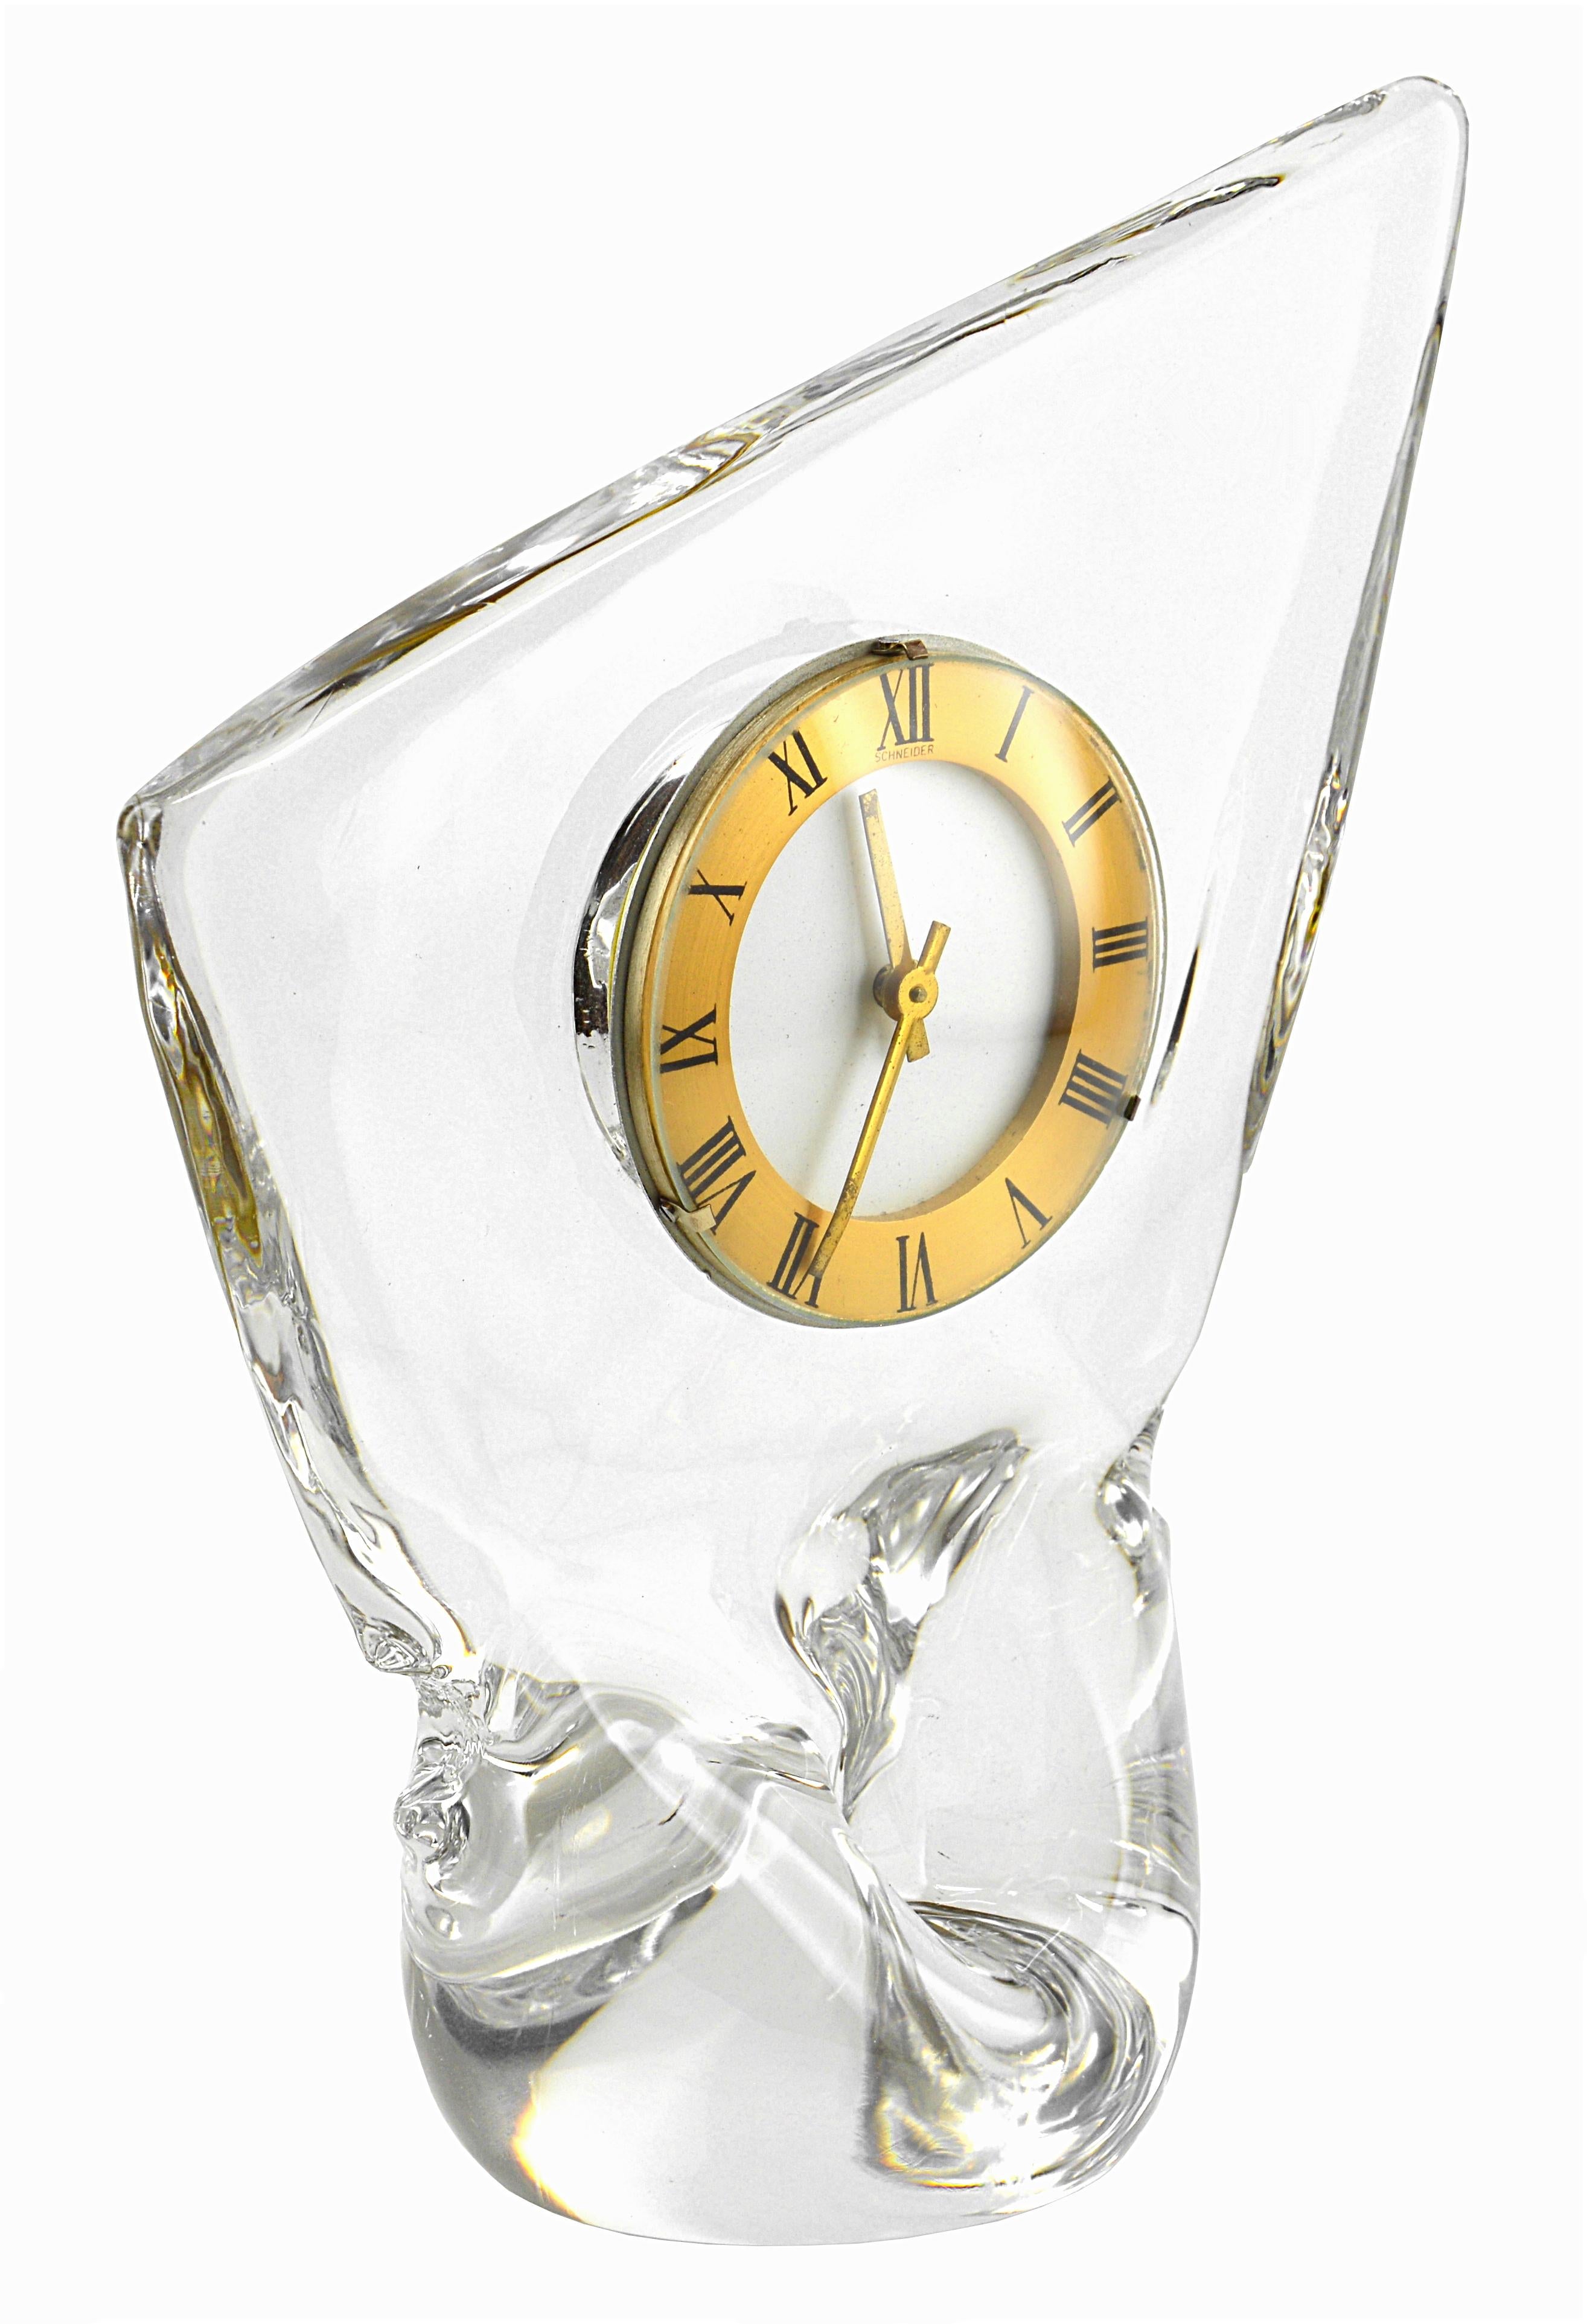 Midcentury table clock by Cristalleries Schneider (Epinay-sur-Seine, Paris), France, 1950s. Very thick crystal. Brass dial with its round glass. Signed 